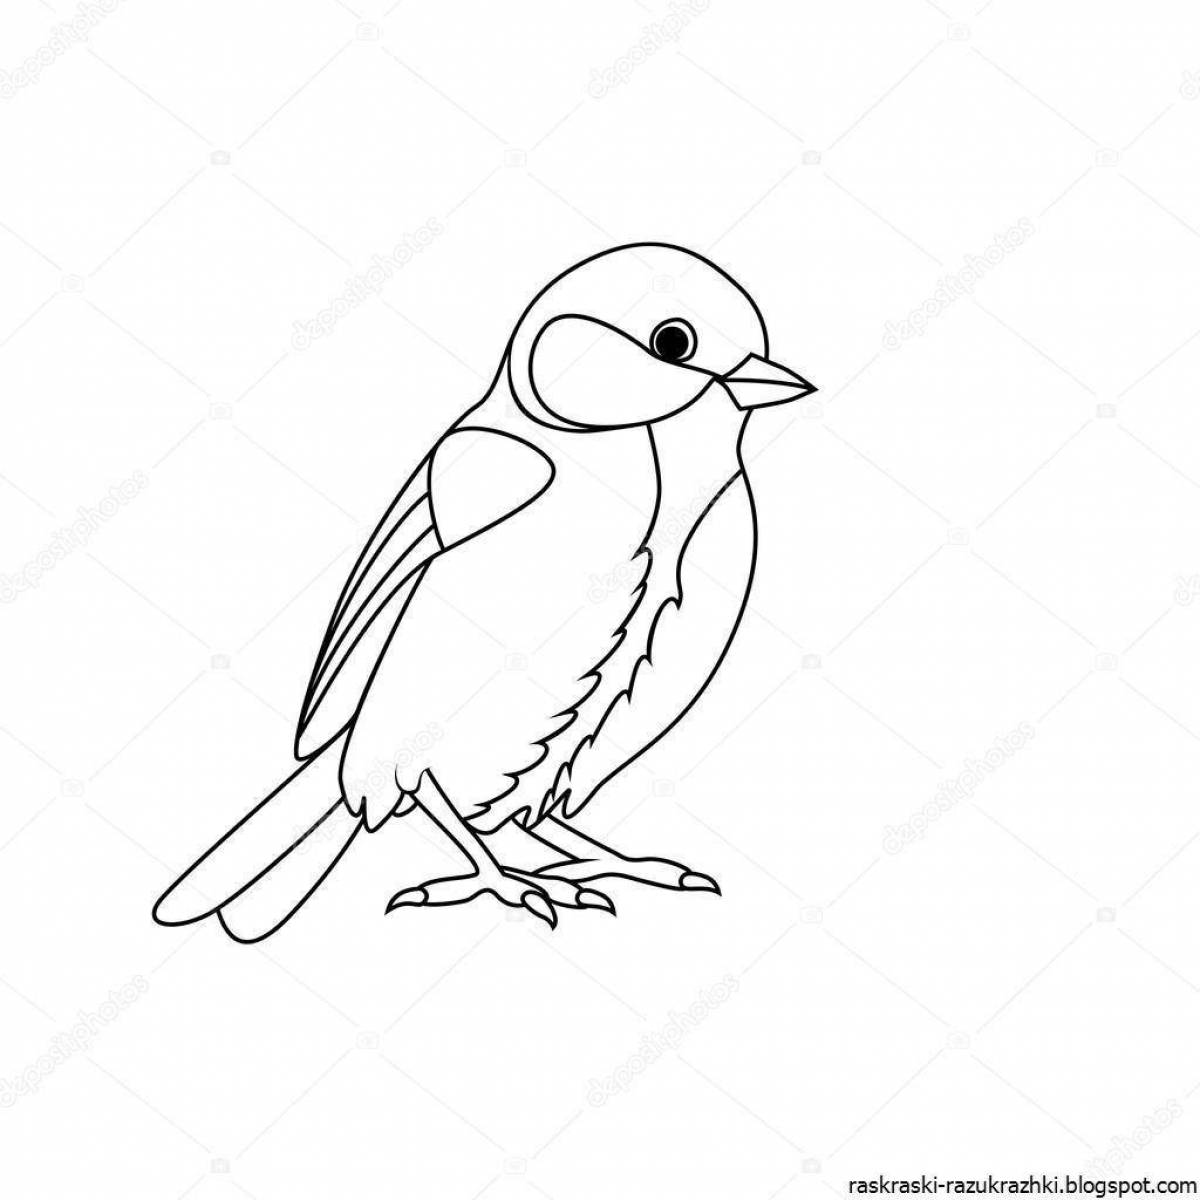 Incredible drawing of a bullfinch for kids